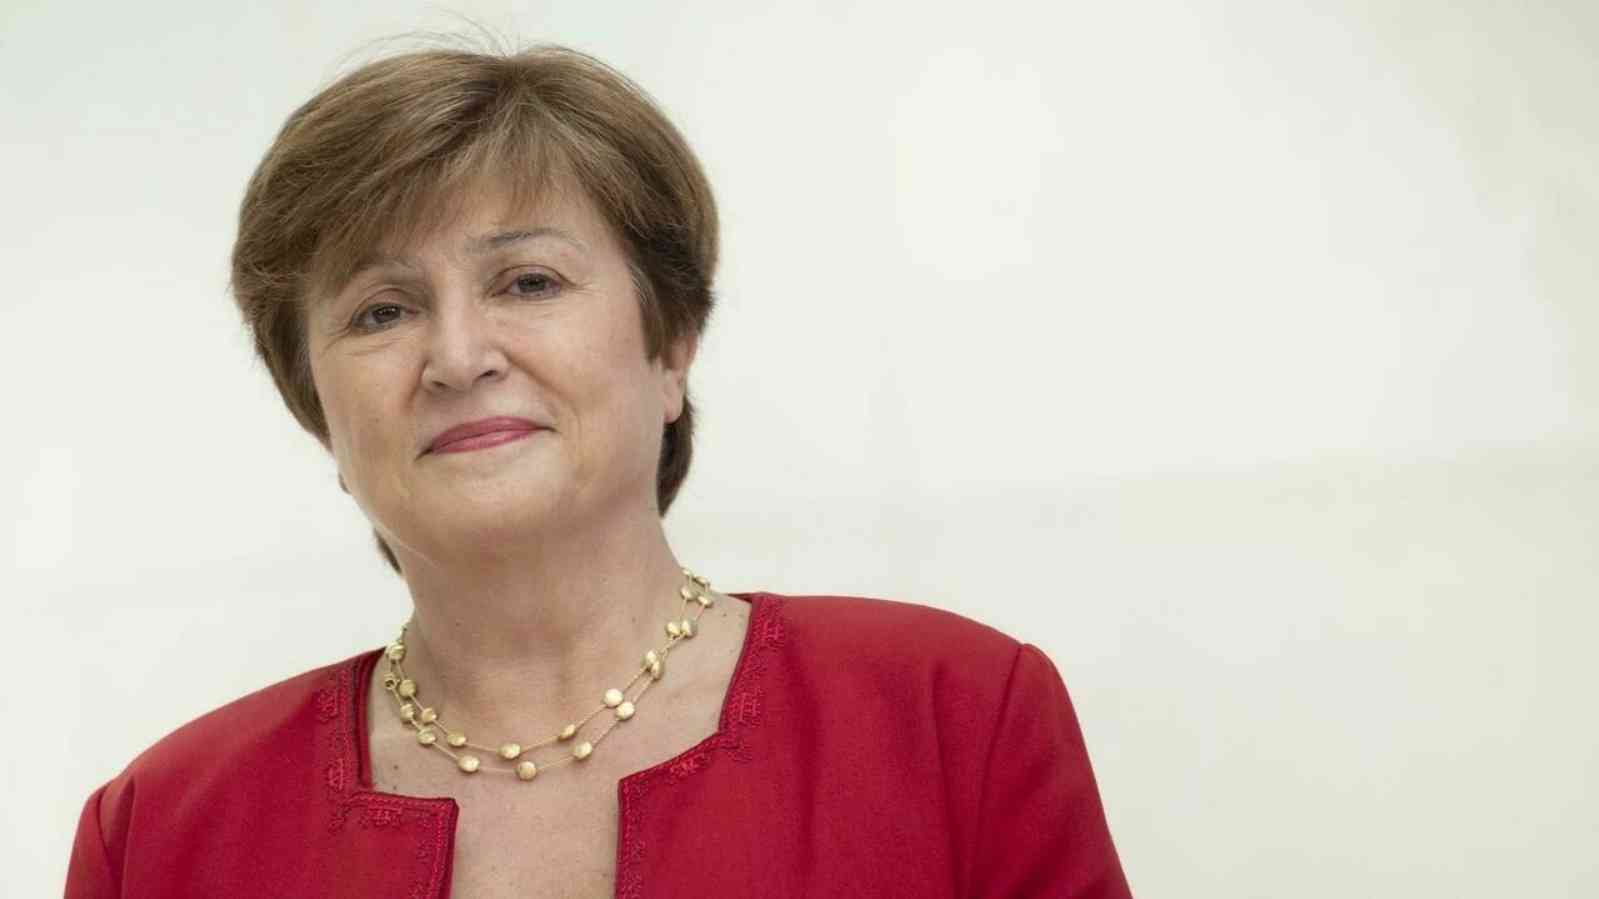 The IMF will decide “very soon” the issue of Georgieva staying in her position